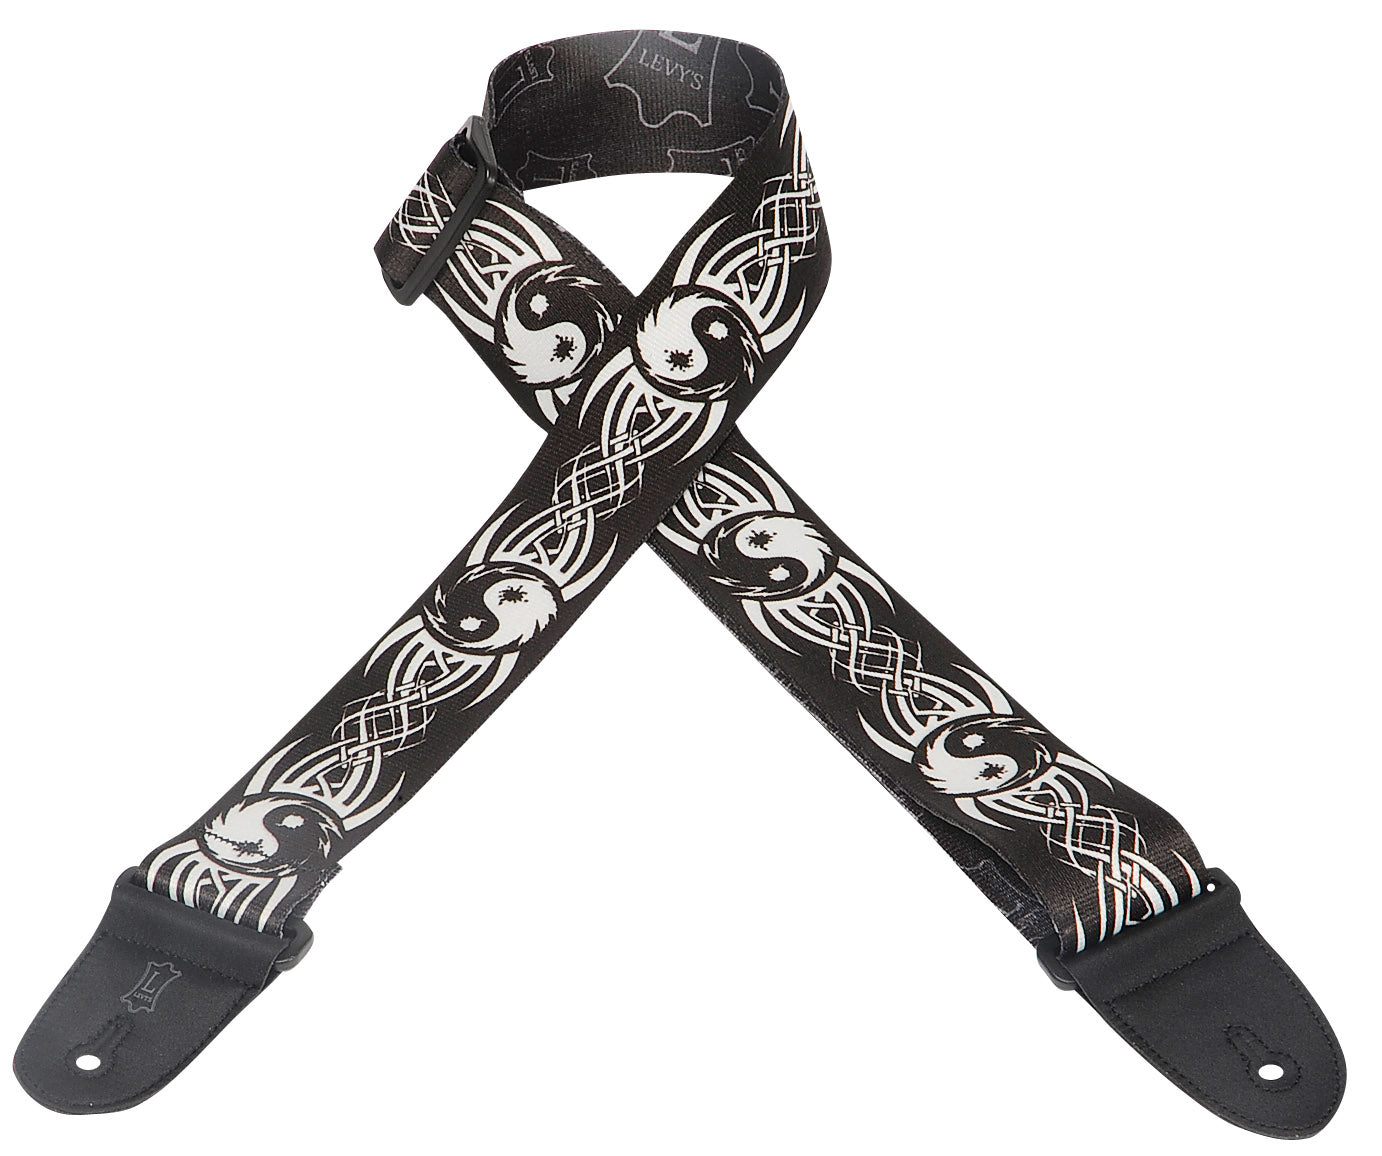 LEVY'S 2" POLYESTER GUITAR STRAP WITH PRINTED DESIGN BLACK/WHITE YIN AND YANG